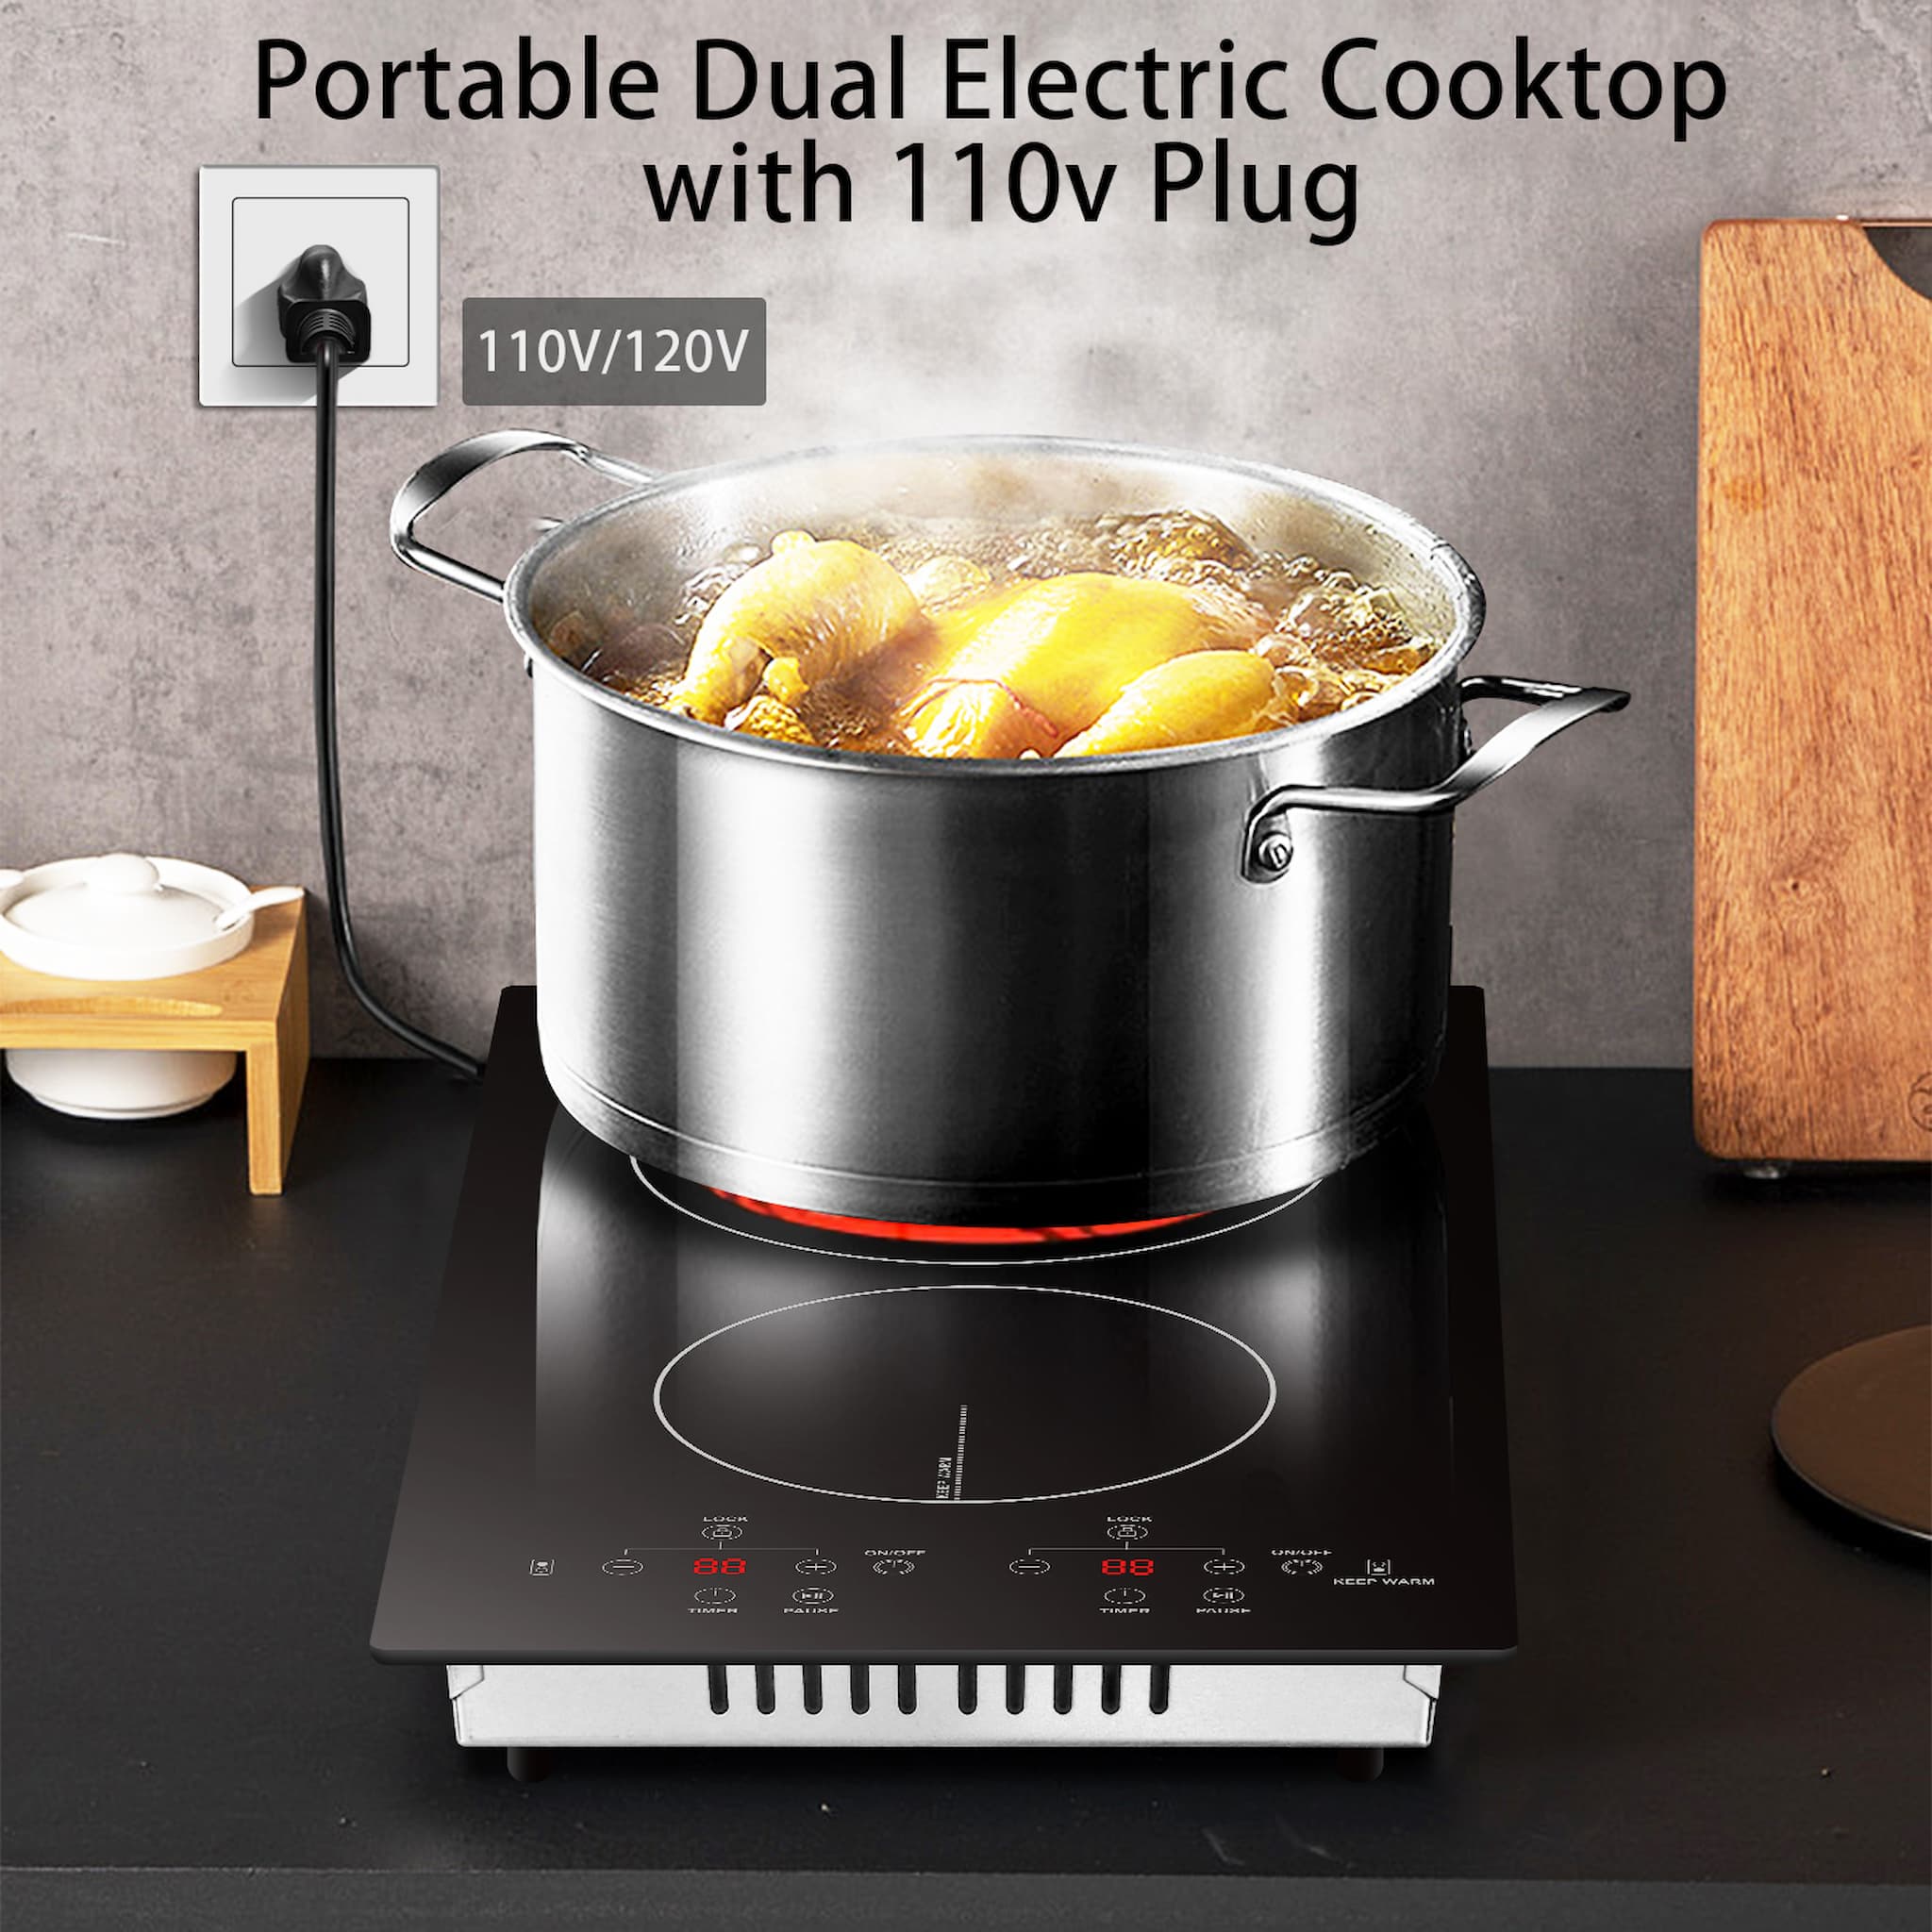 Karinear Portable Electric Cooktop 2 Burners, 110v Plug in Electric Stove  Top, Countertop Use or Built-in Install, 12'' Ceramic Cooktop with  Beautiful